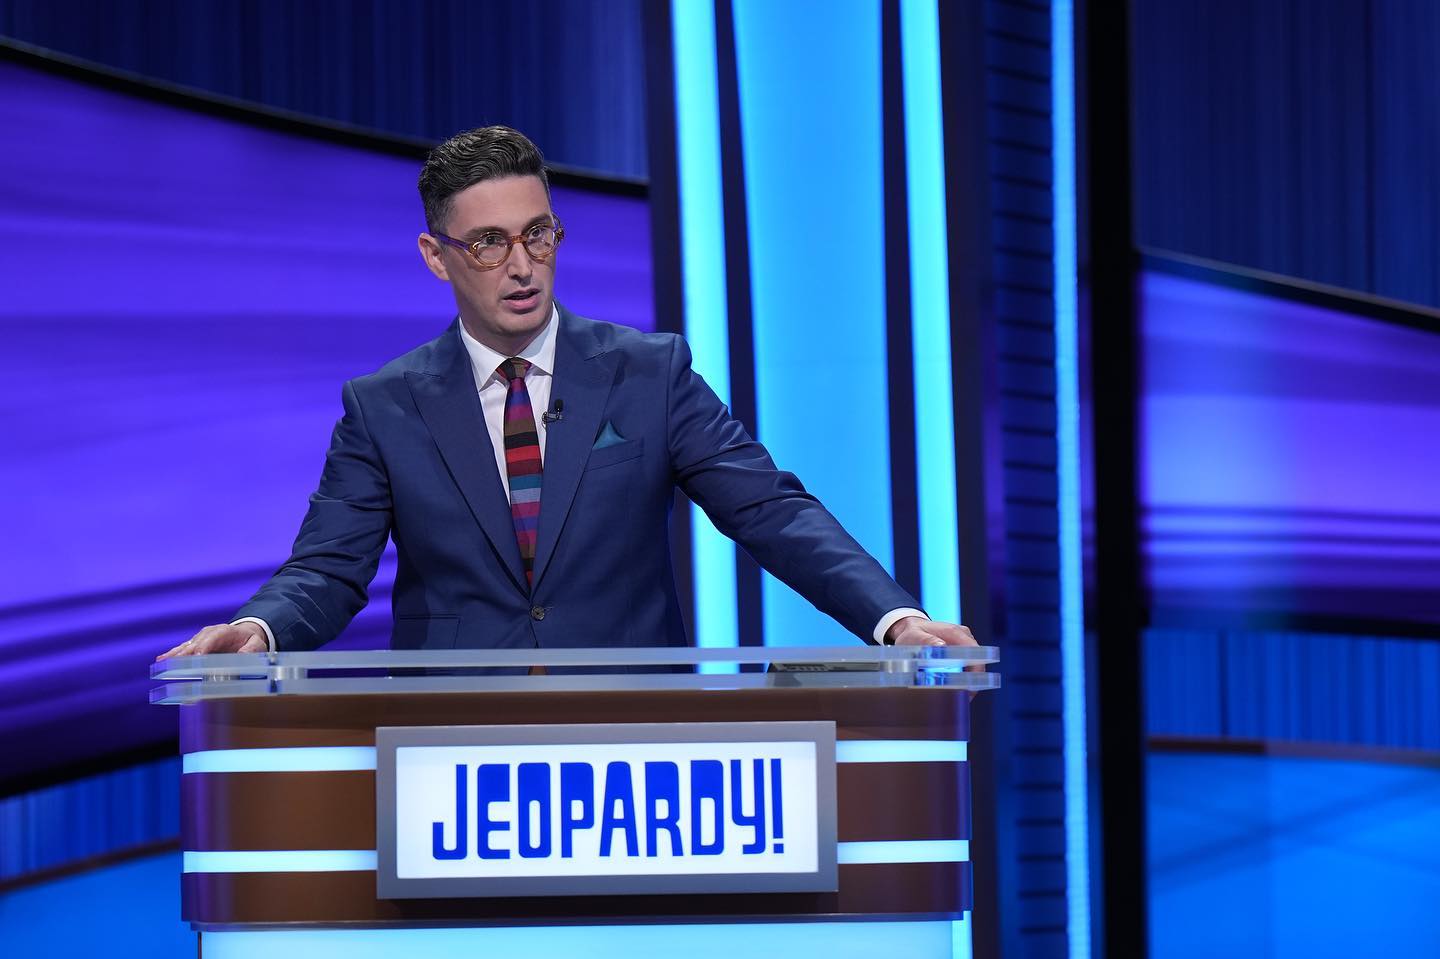 Buzzy Cohen helped host some Jeopardy! audio-only episodes after Mayim was fired